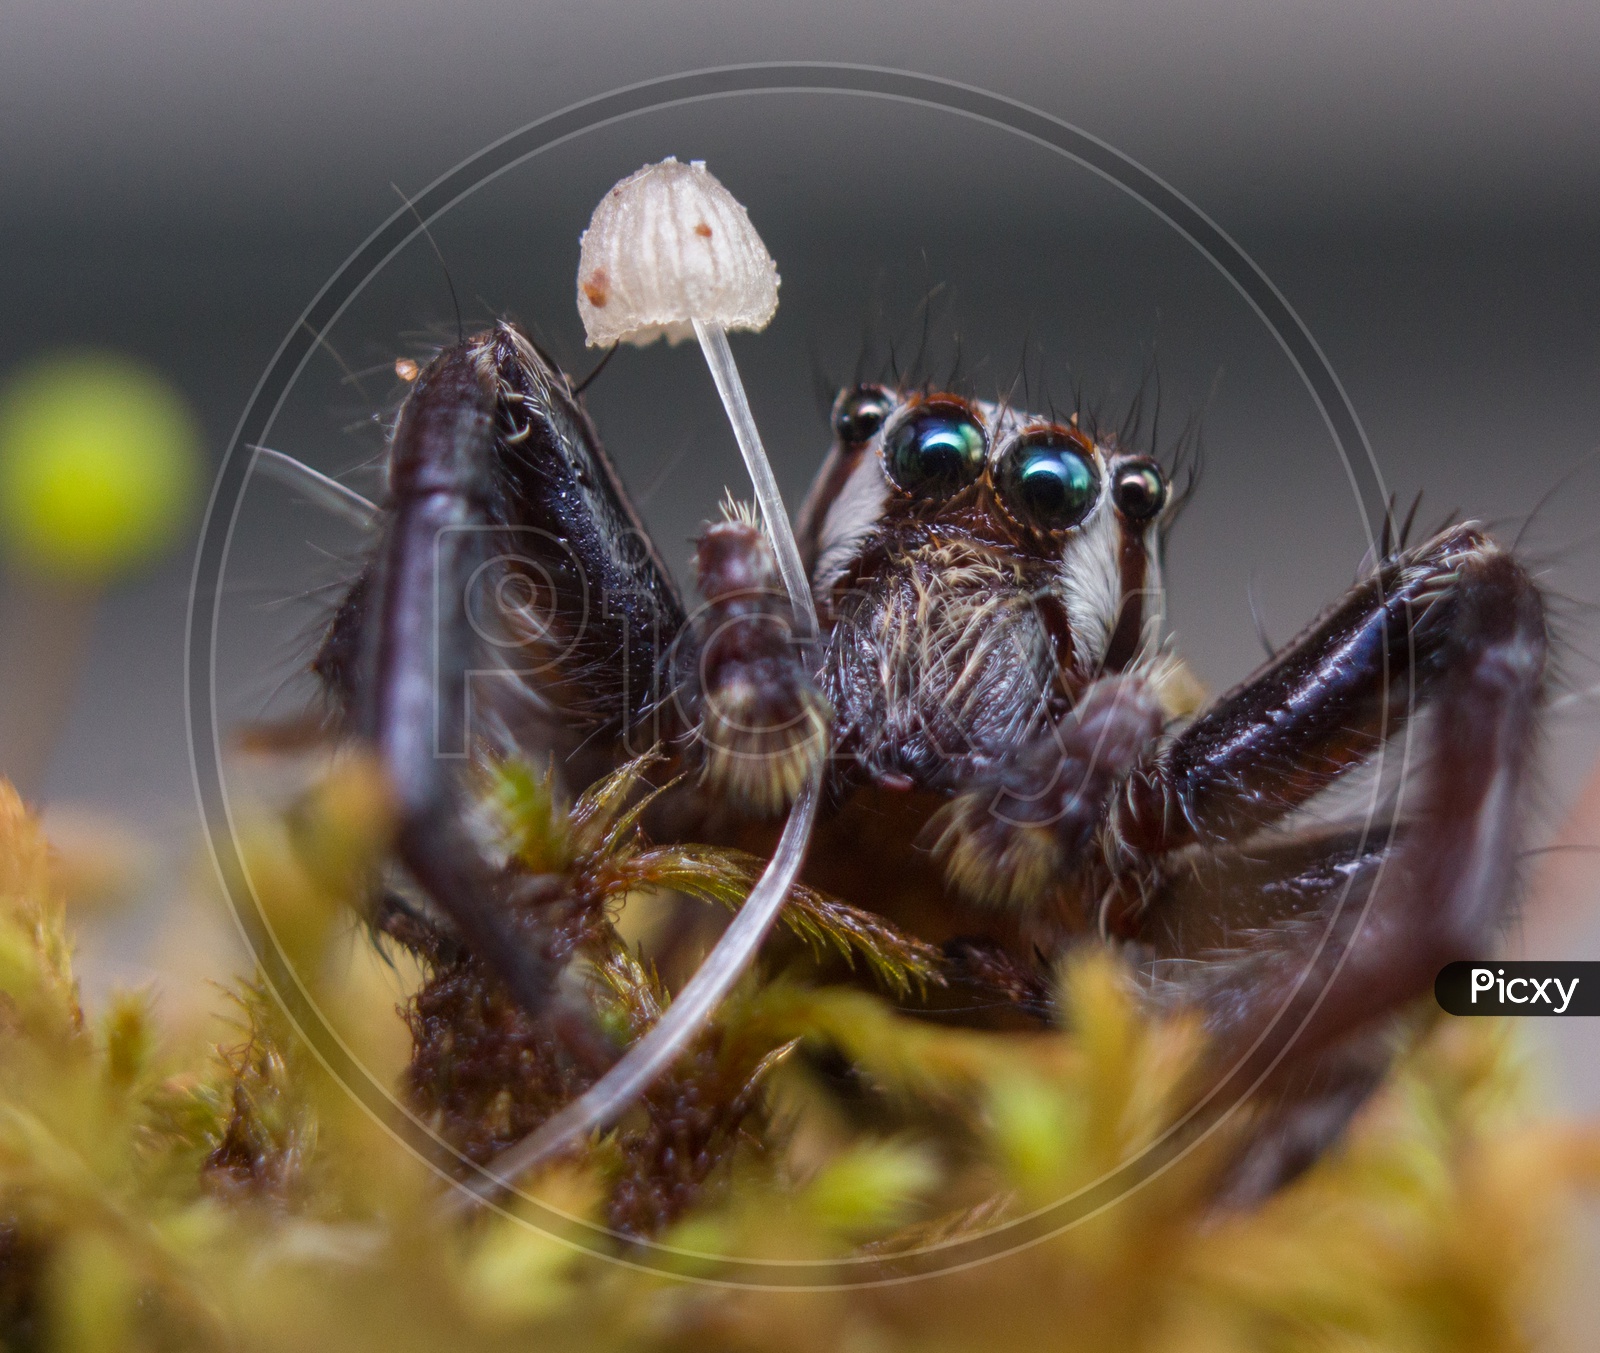 Spider with an umbrella